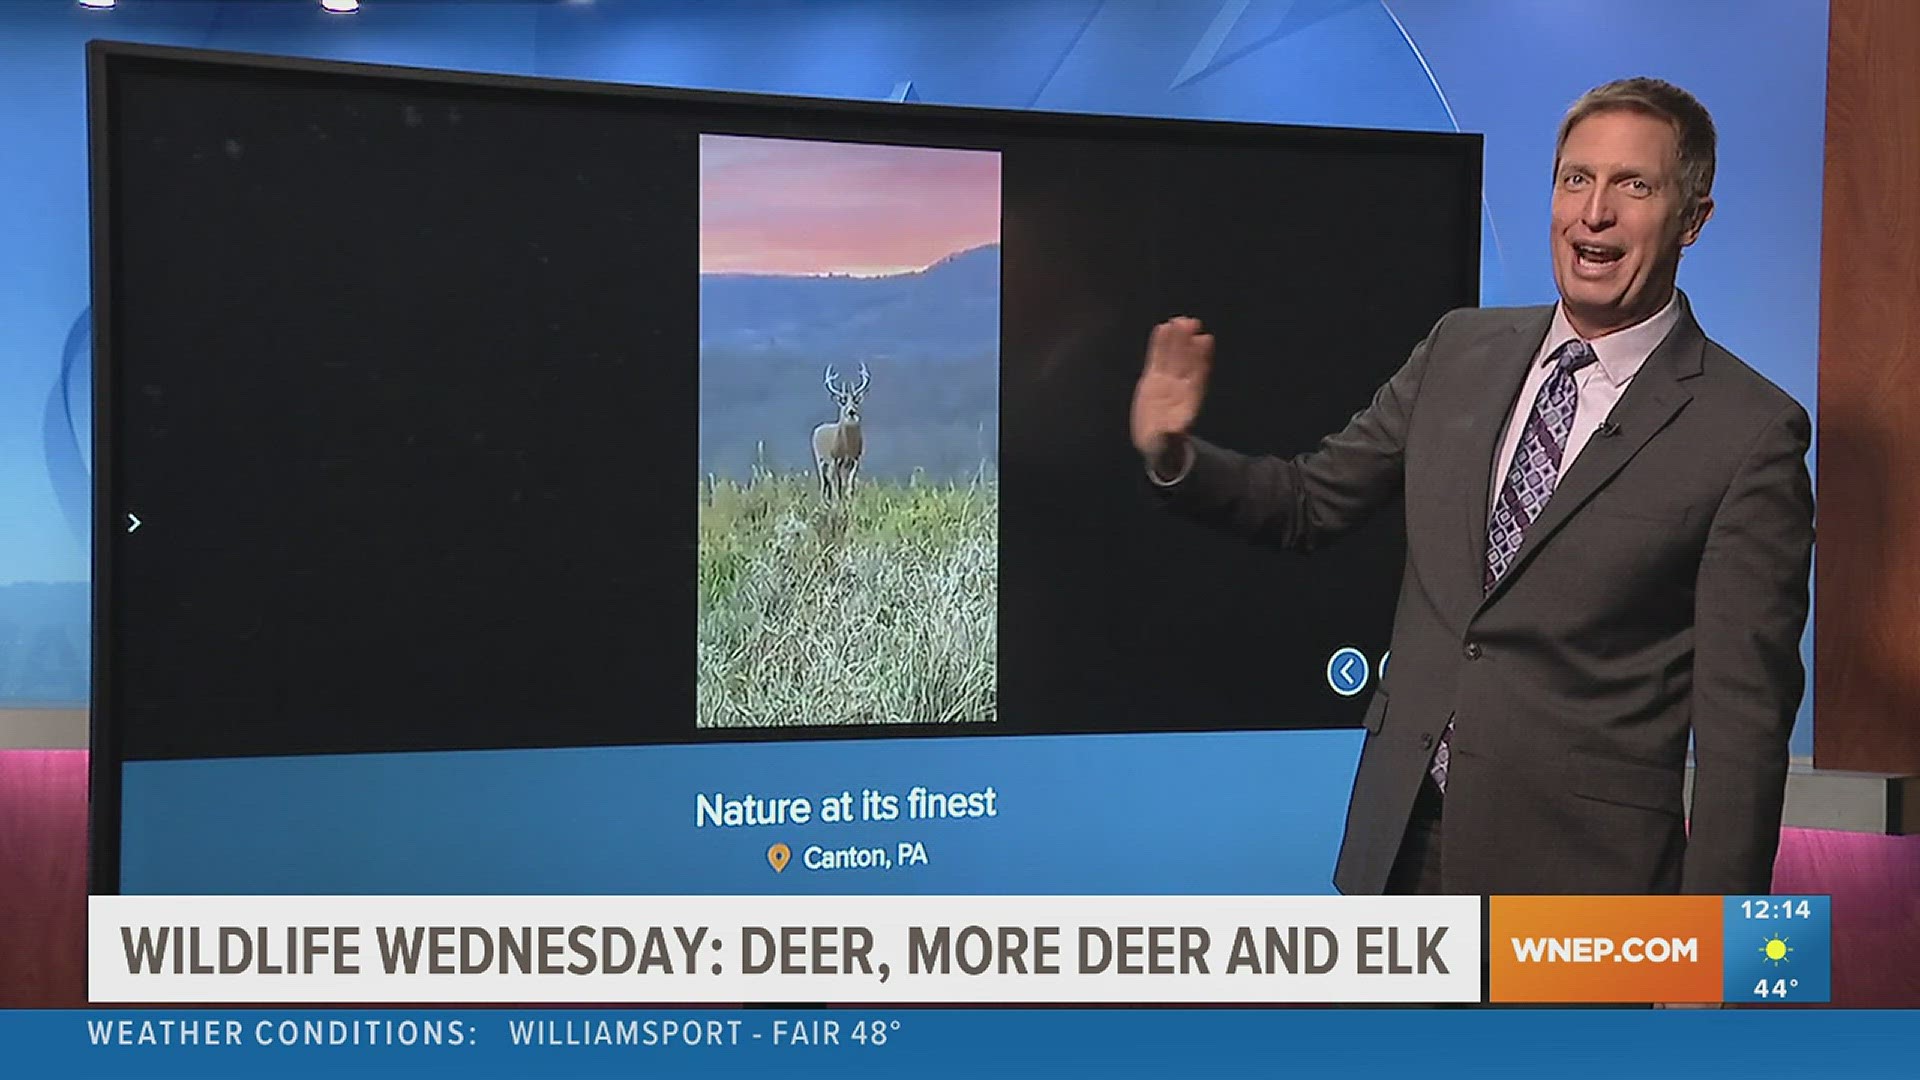 Bears are usually the star of Wildlife Wednesday, but this week, whitetail deer are taking the spotlight.